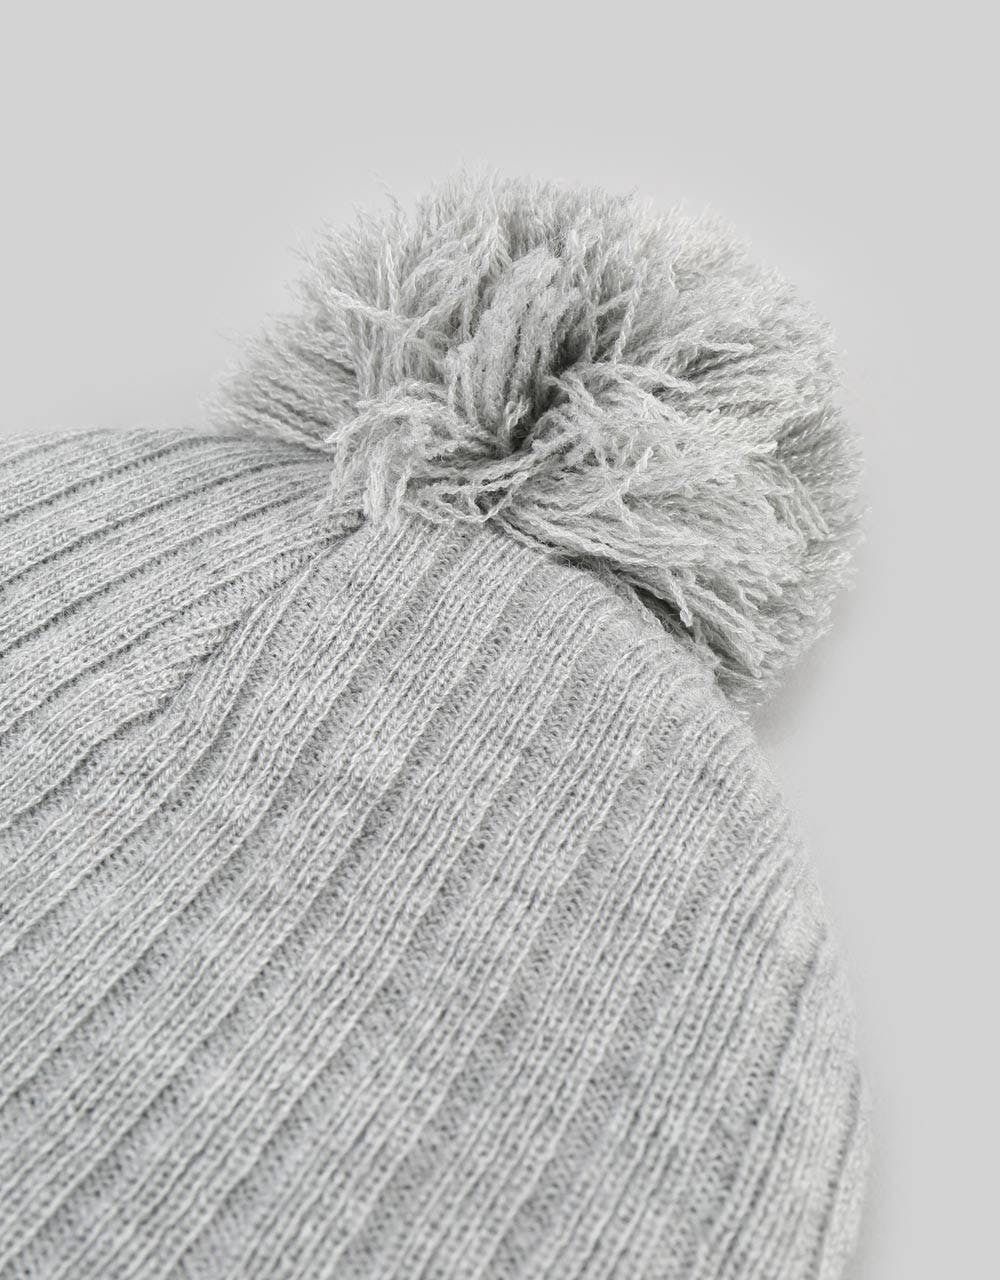 Route One Ribbed Bobble Beanie - Heather Grey